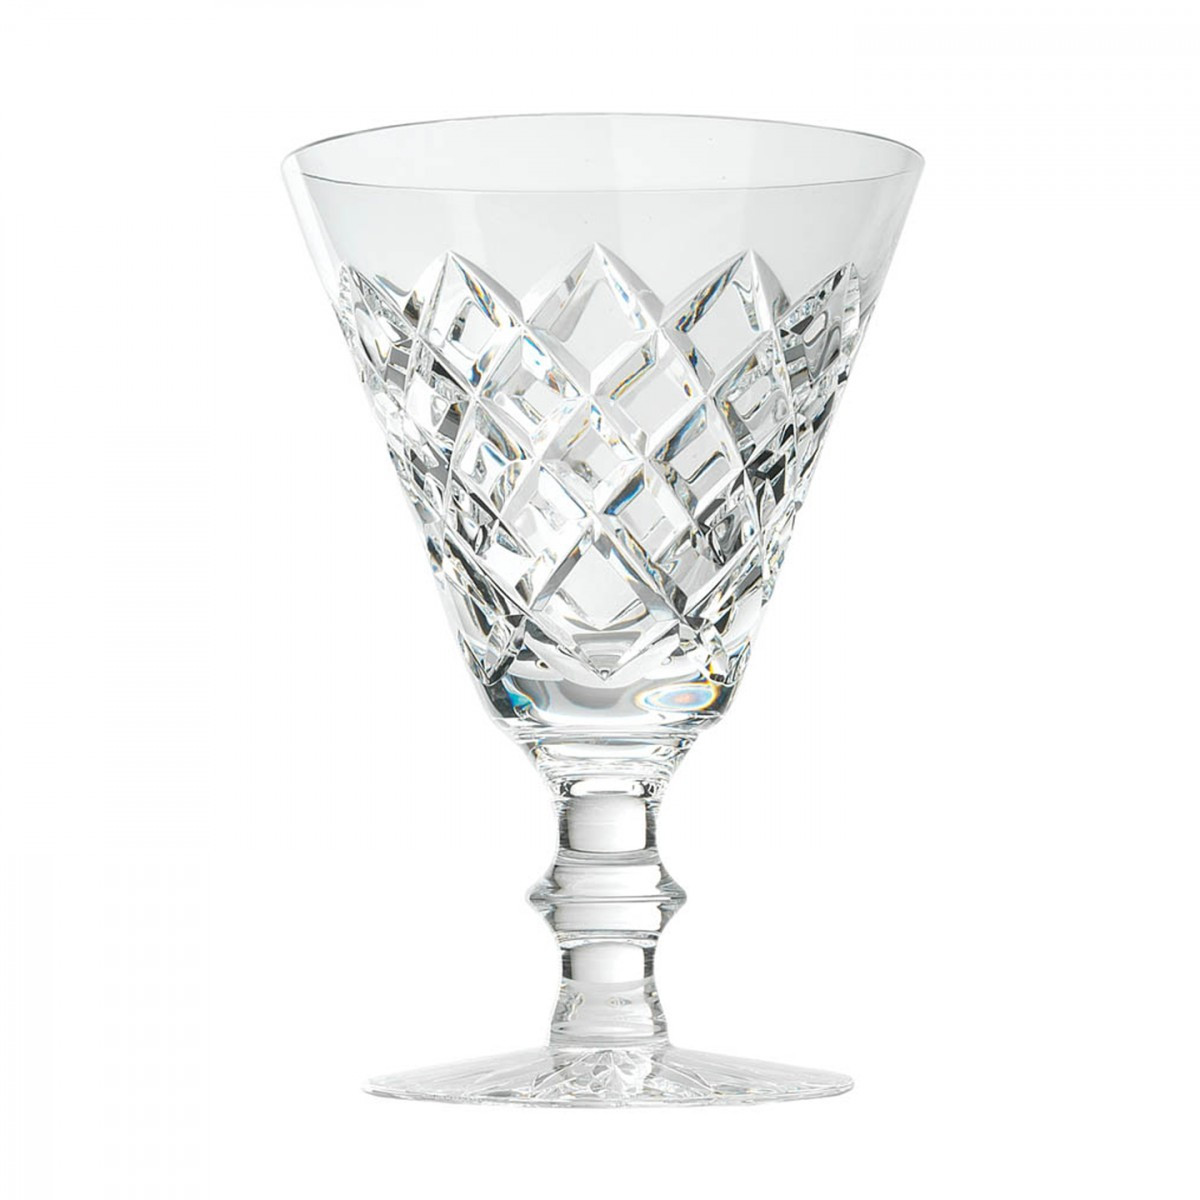 waterford vases discontinued of adare goblet discontinued waterford us inside adare goblet discontinued